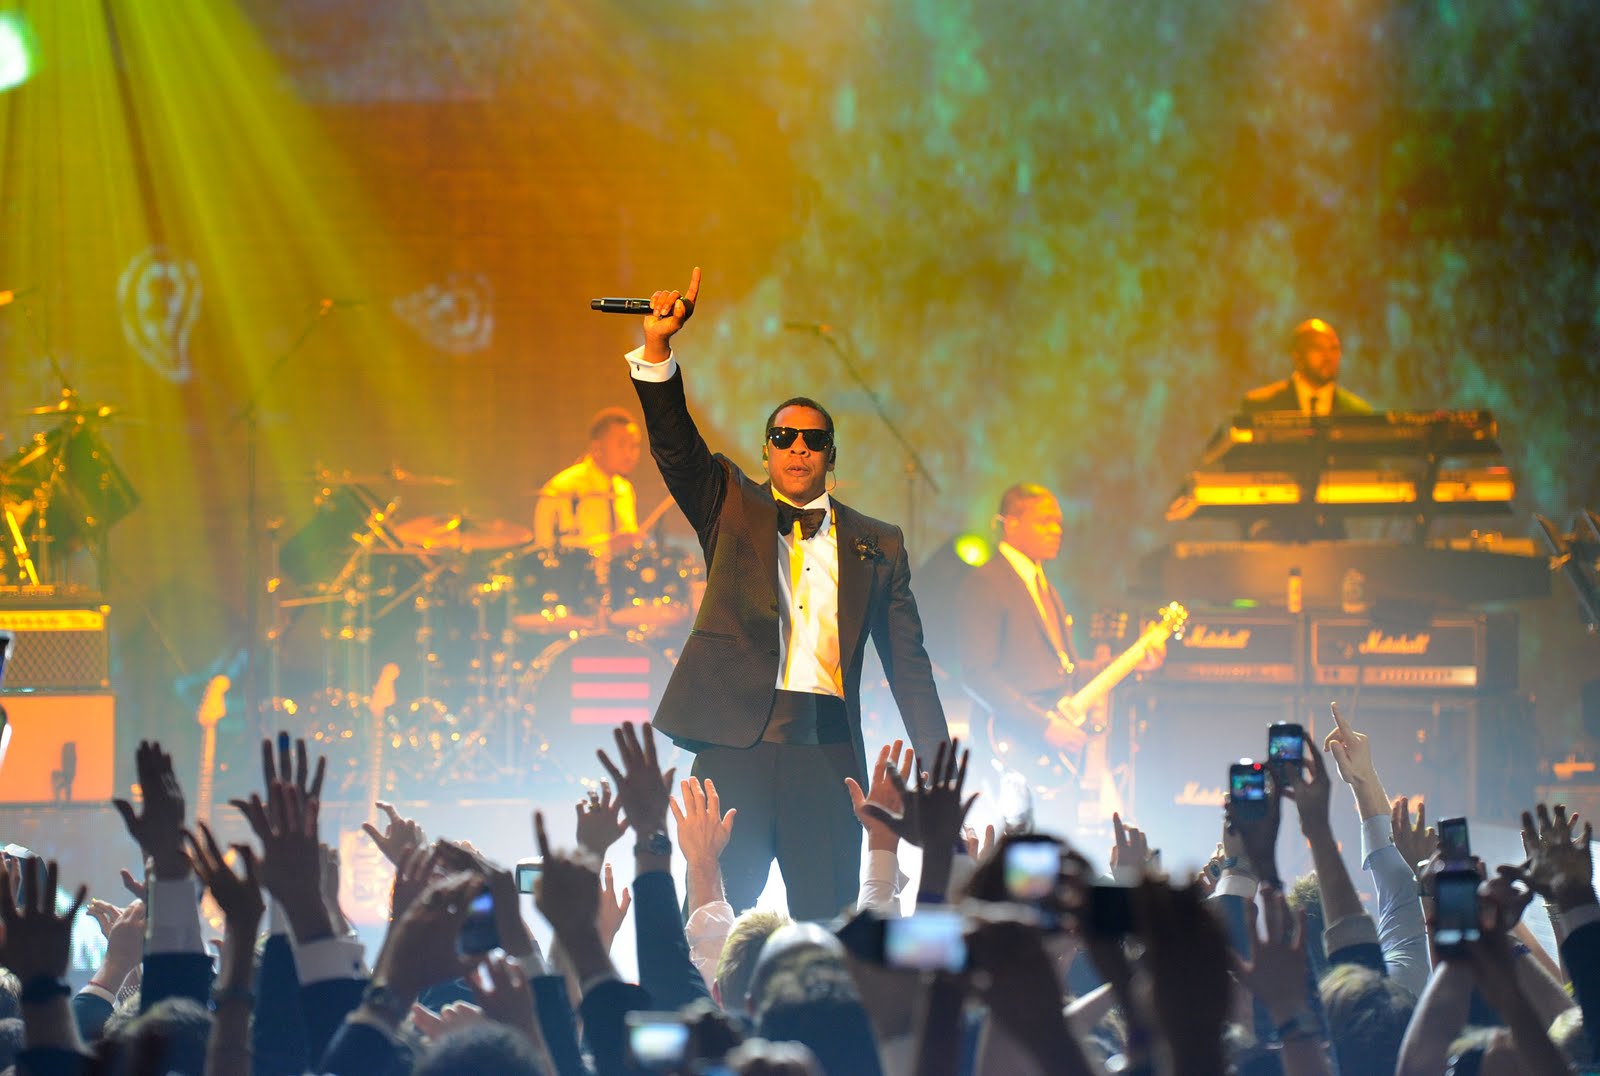 http://3.bp.blogspot.com/_Wplv5-05z-c/TSEnzQiG6kI/AAAAAAAABsM/TdqQGrfVEco/s1600/image-1---jay-z-performs-at-the-cosmopolitan-of-las-vegas--new-years-eve-and-grand-opening-celebration.-credit-ethan-miller-wireimage-1293936537.jpg